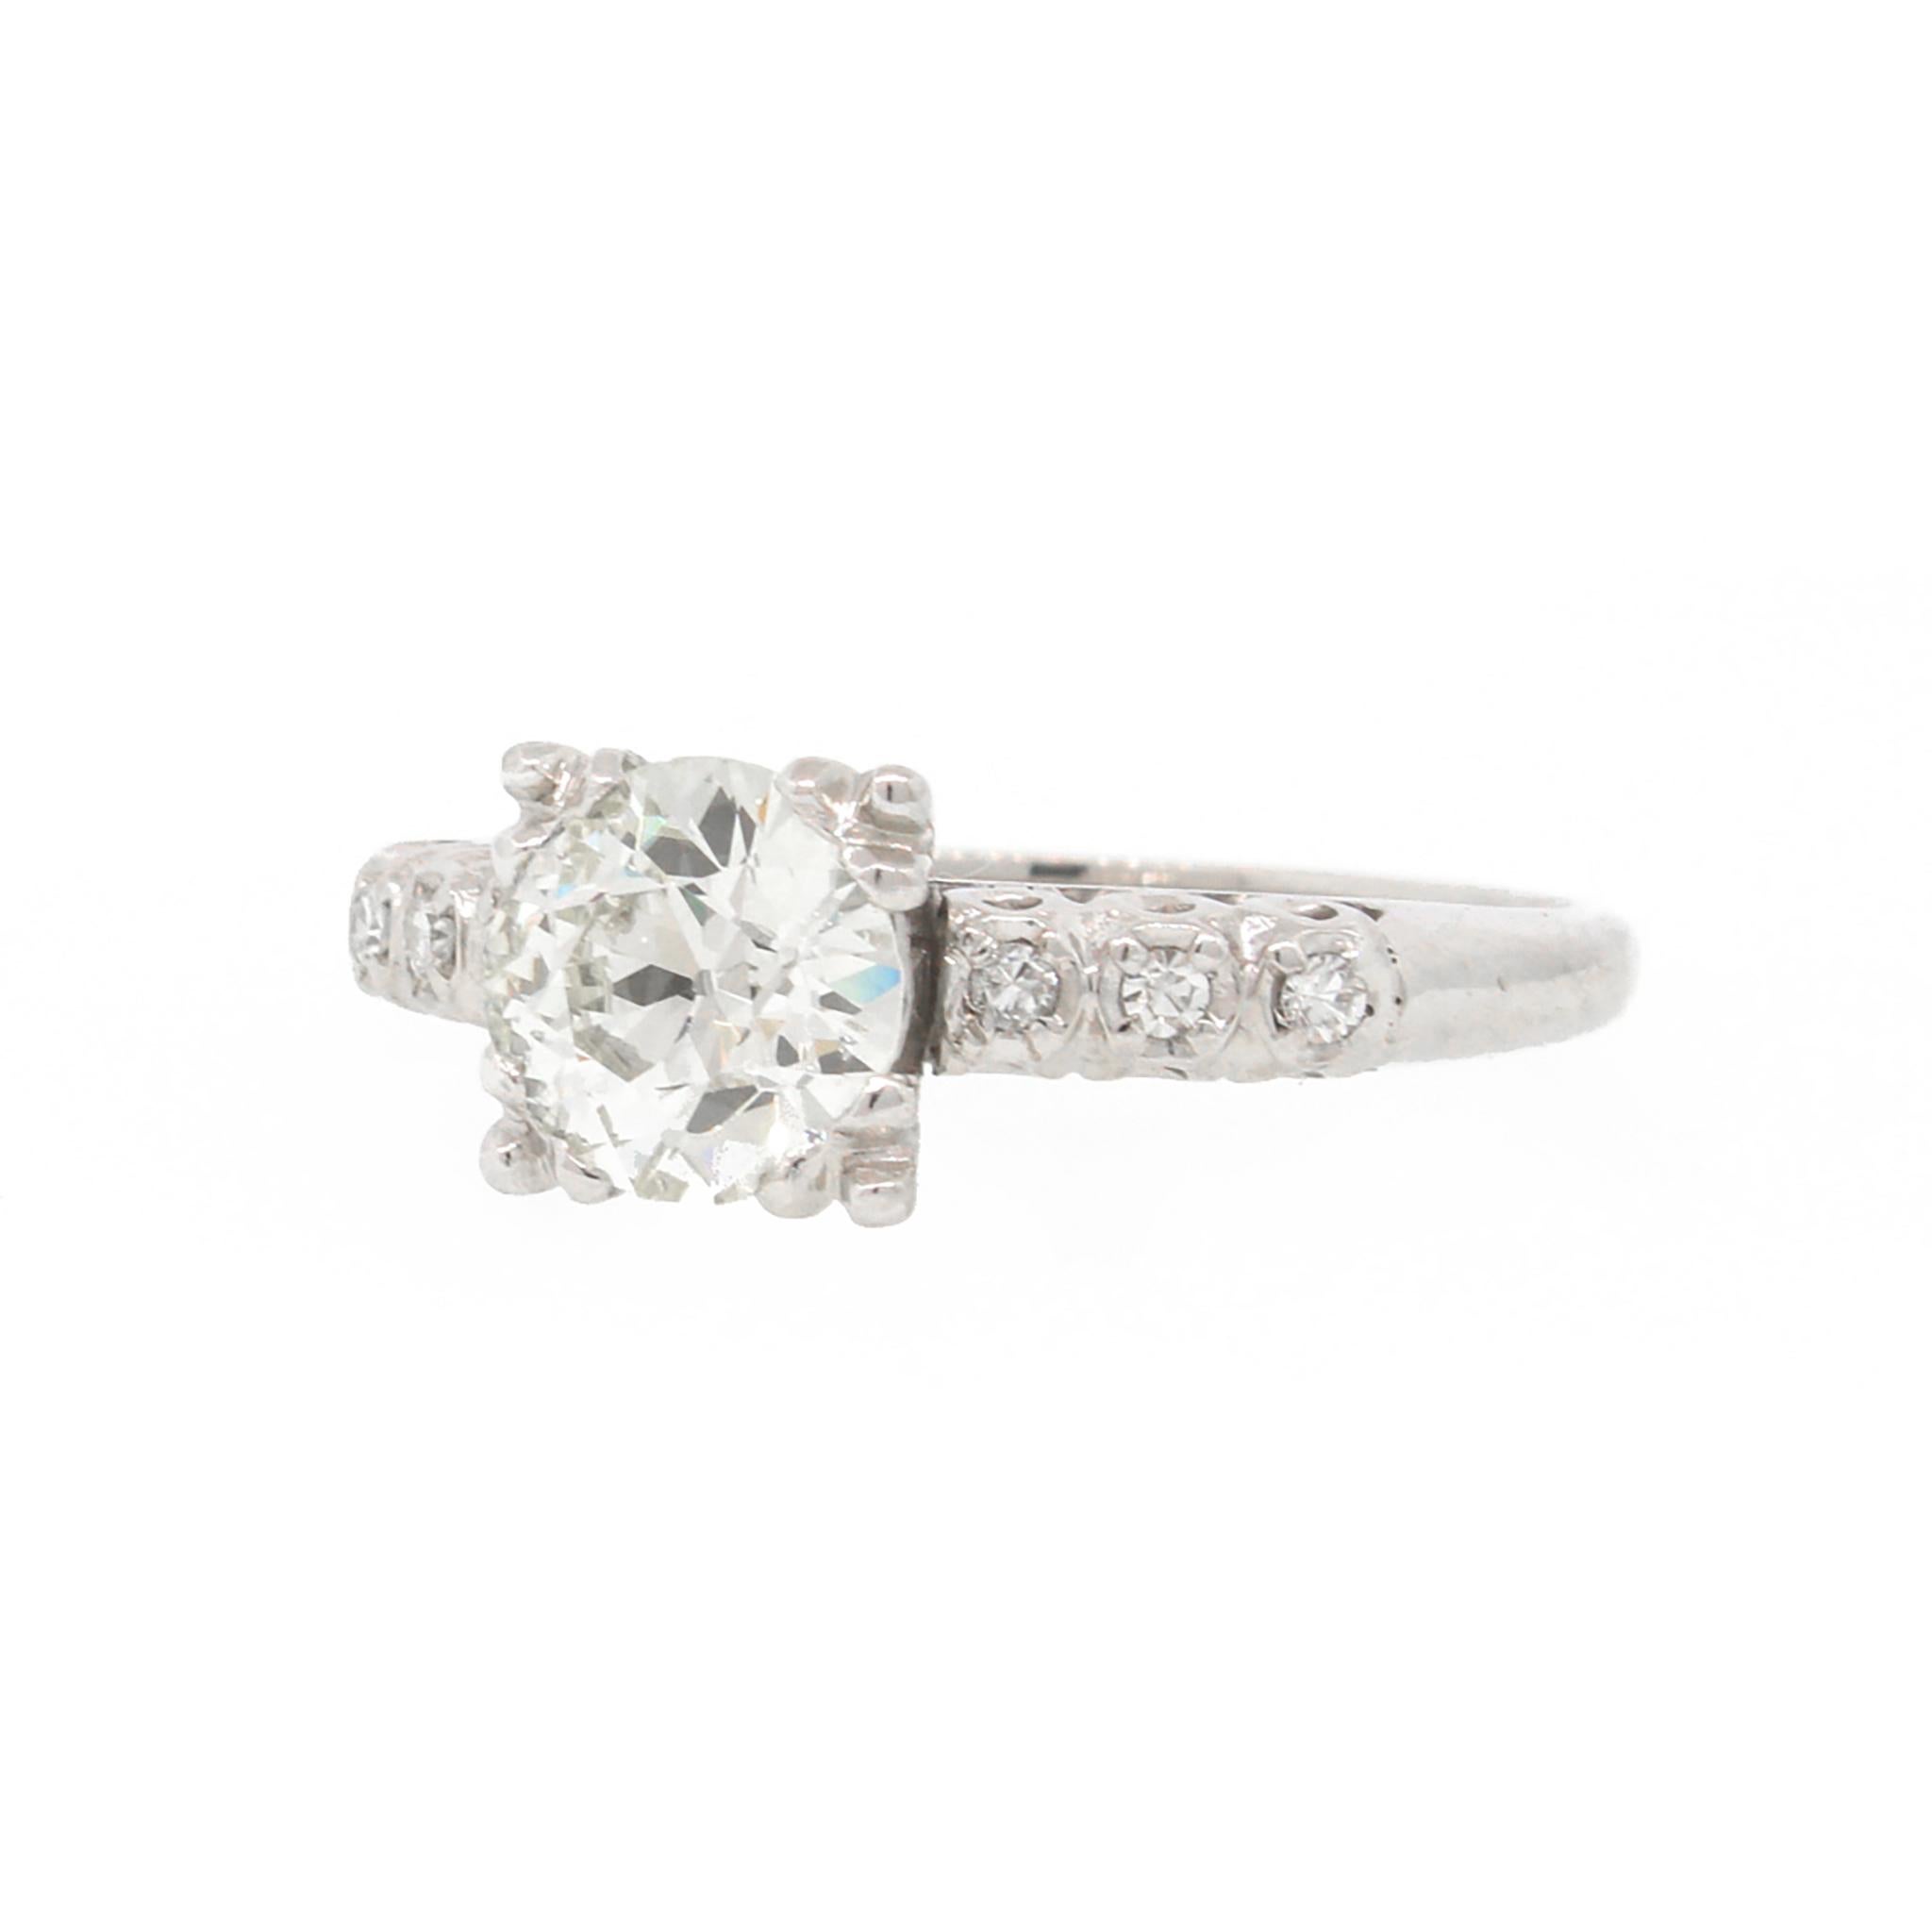 1.70 Carat Old Mine Cut Diamond Engagement White Gold Ring For Sale 2